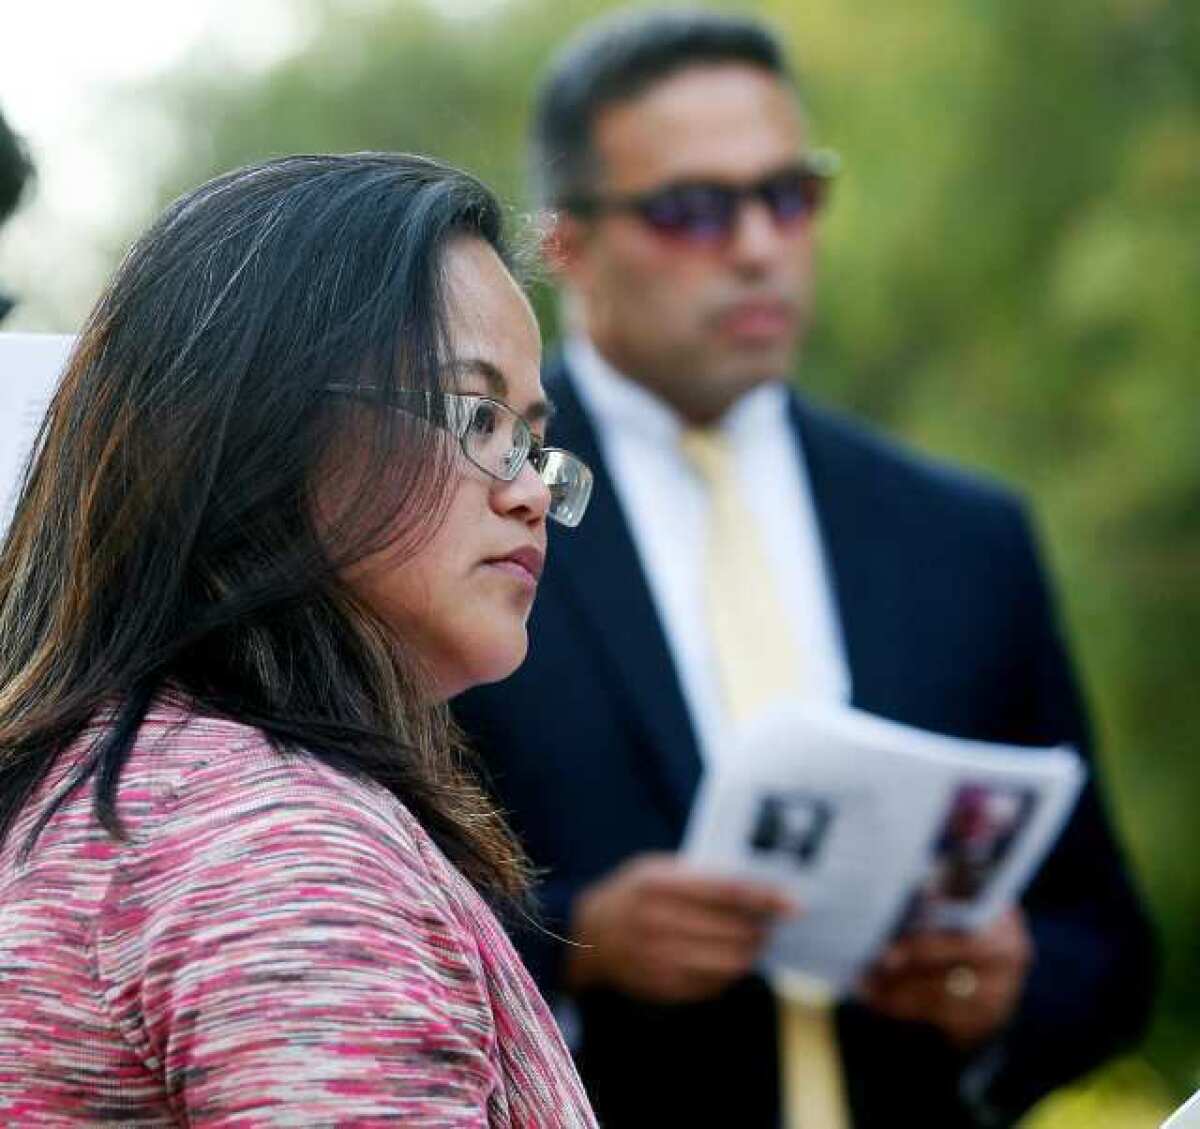 Thea Ivens, wife of Stephen Ivens, at a prayer vigil for her missing FBI agent husband at McCambridge Park in Burbank.